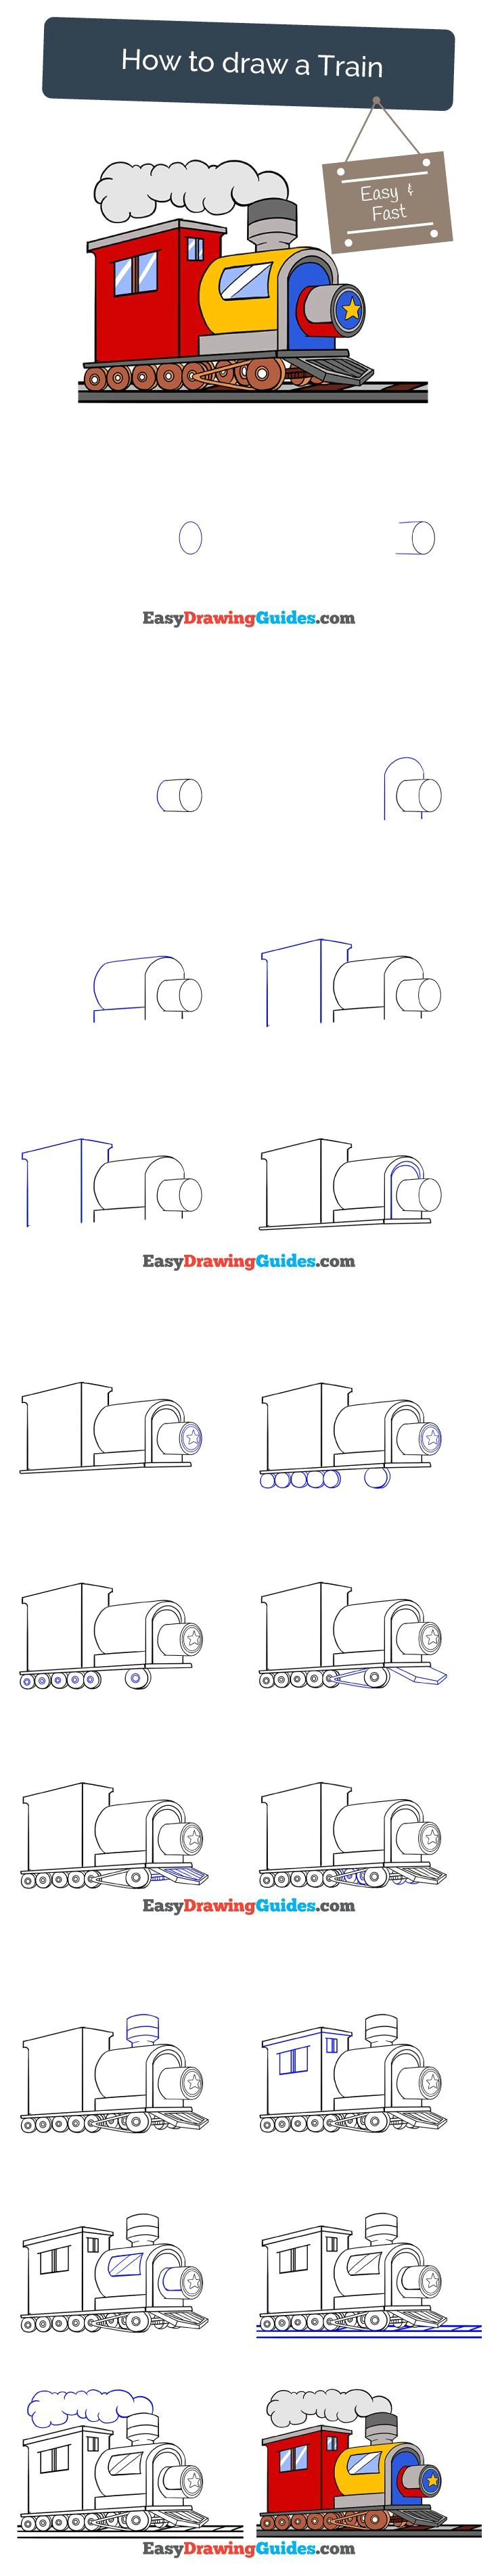 learn how to draw a train easy step by step drawing tutorial for